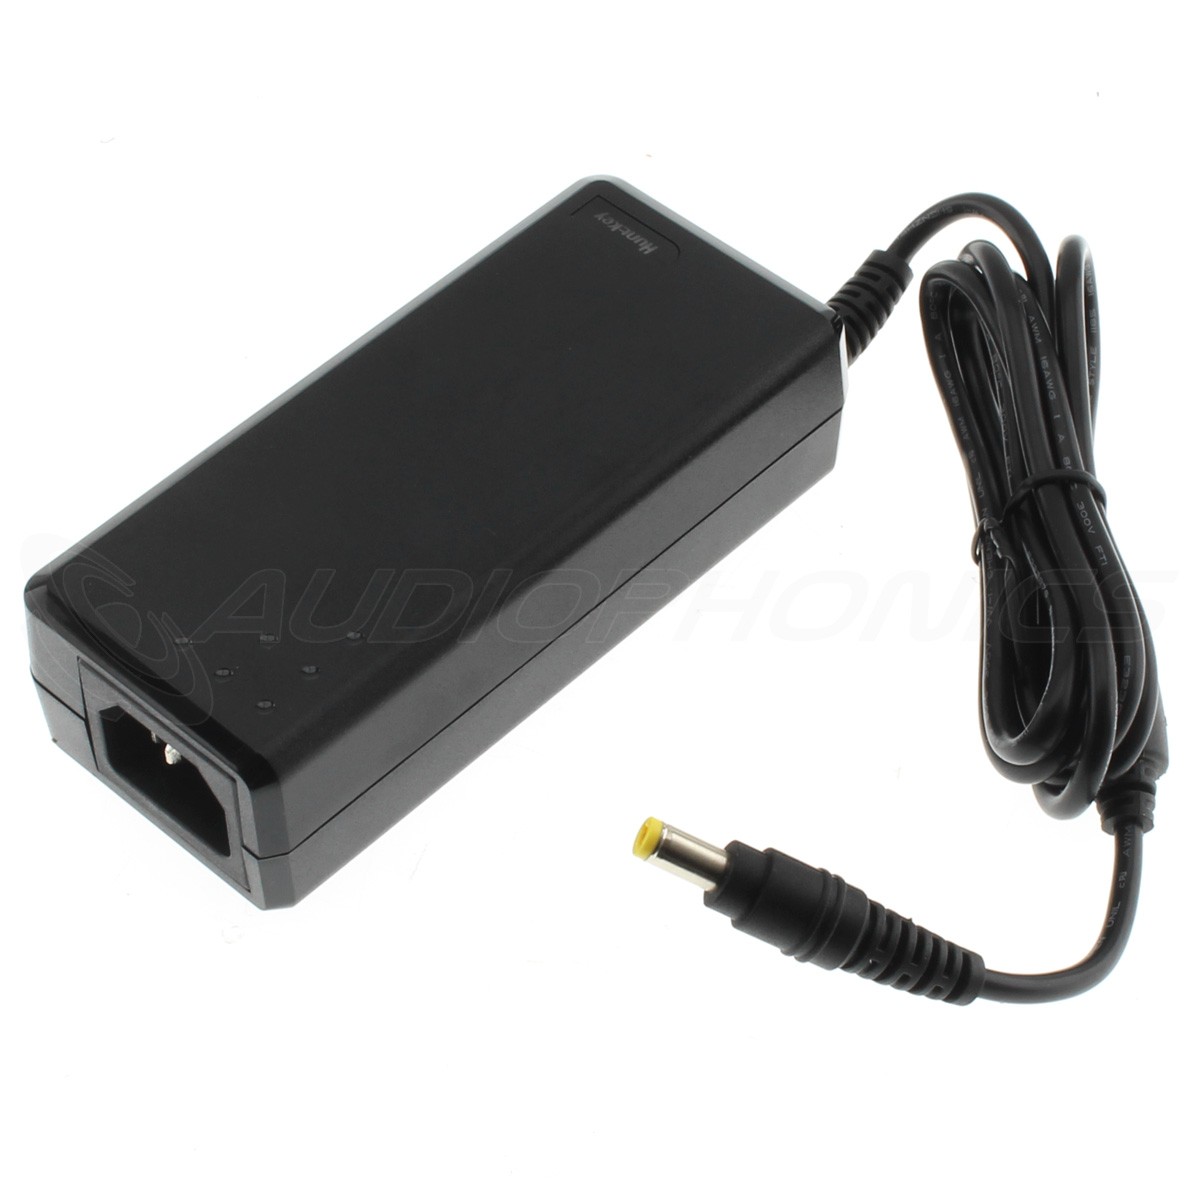 Security-01 AC 100-240V to DC 12V 5A Power Supply Adapter